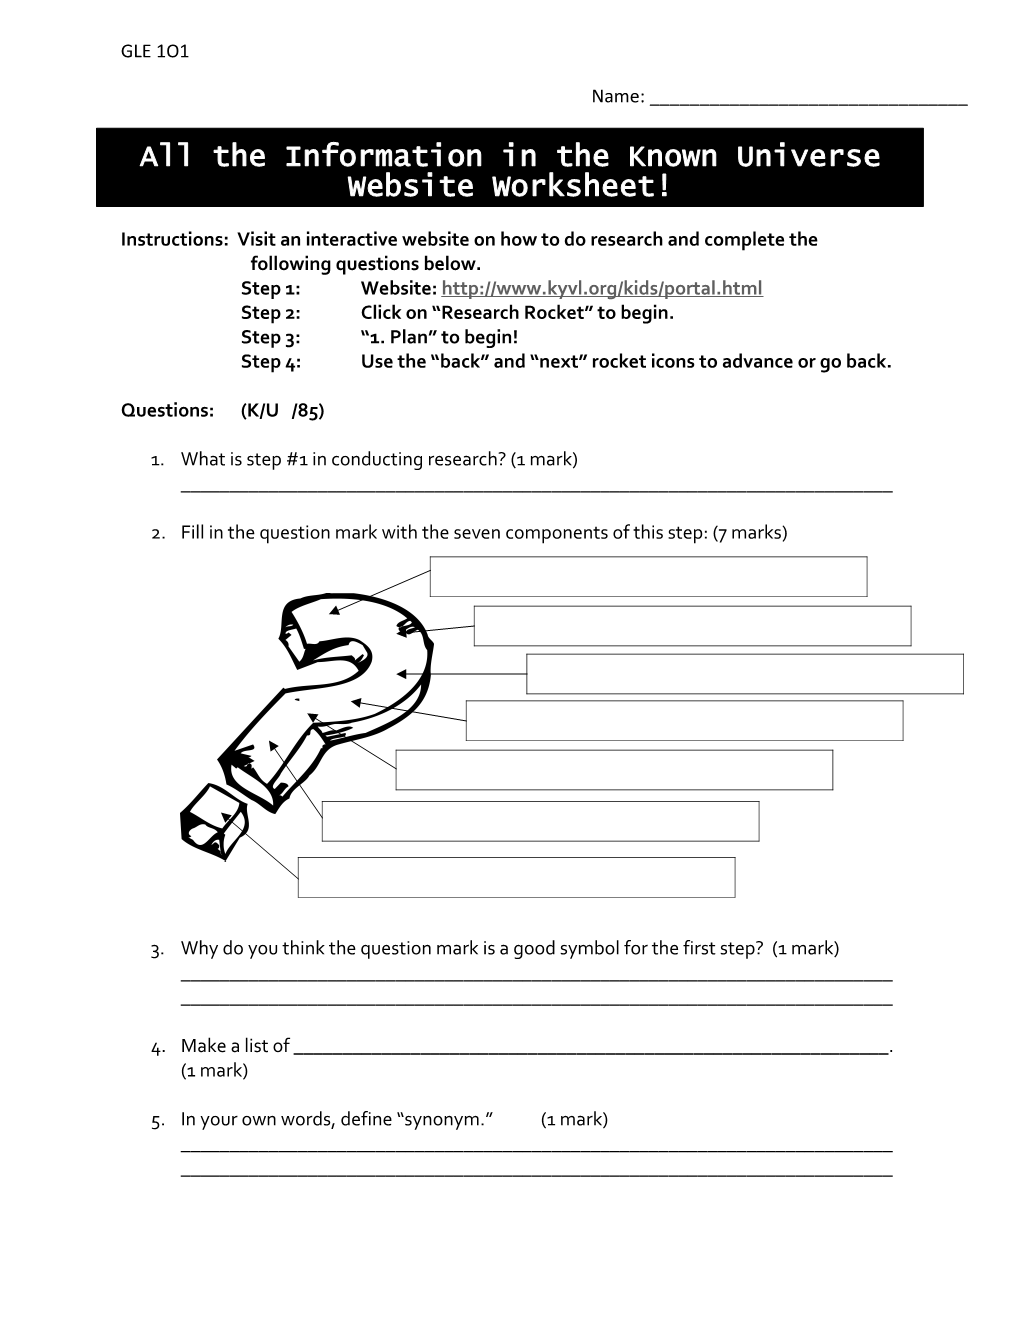 All the Information in the Known Universe Website Worksheet!